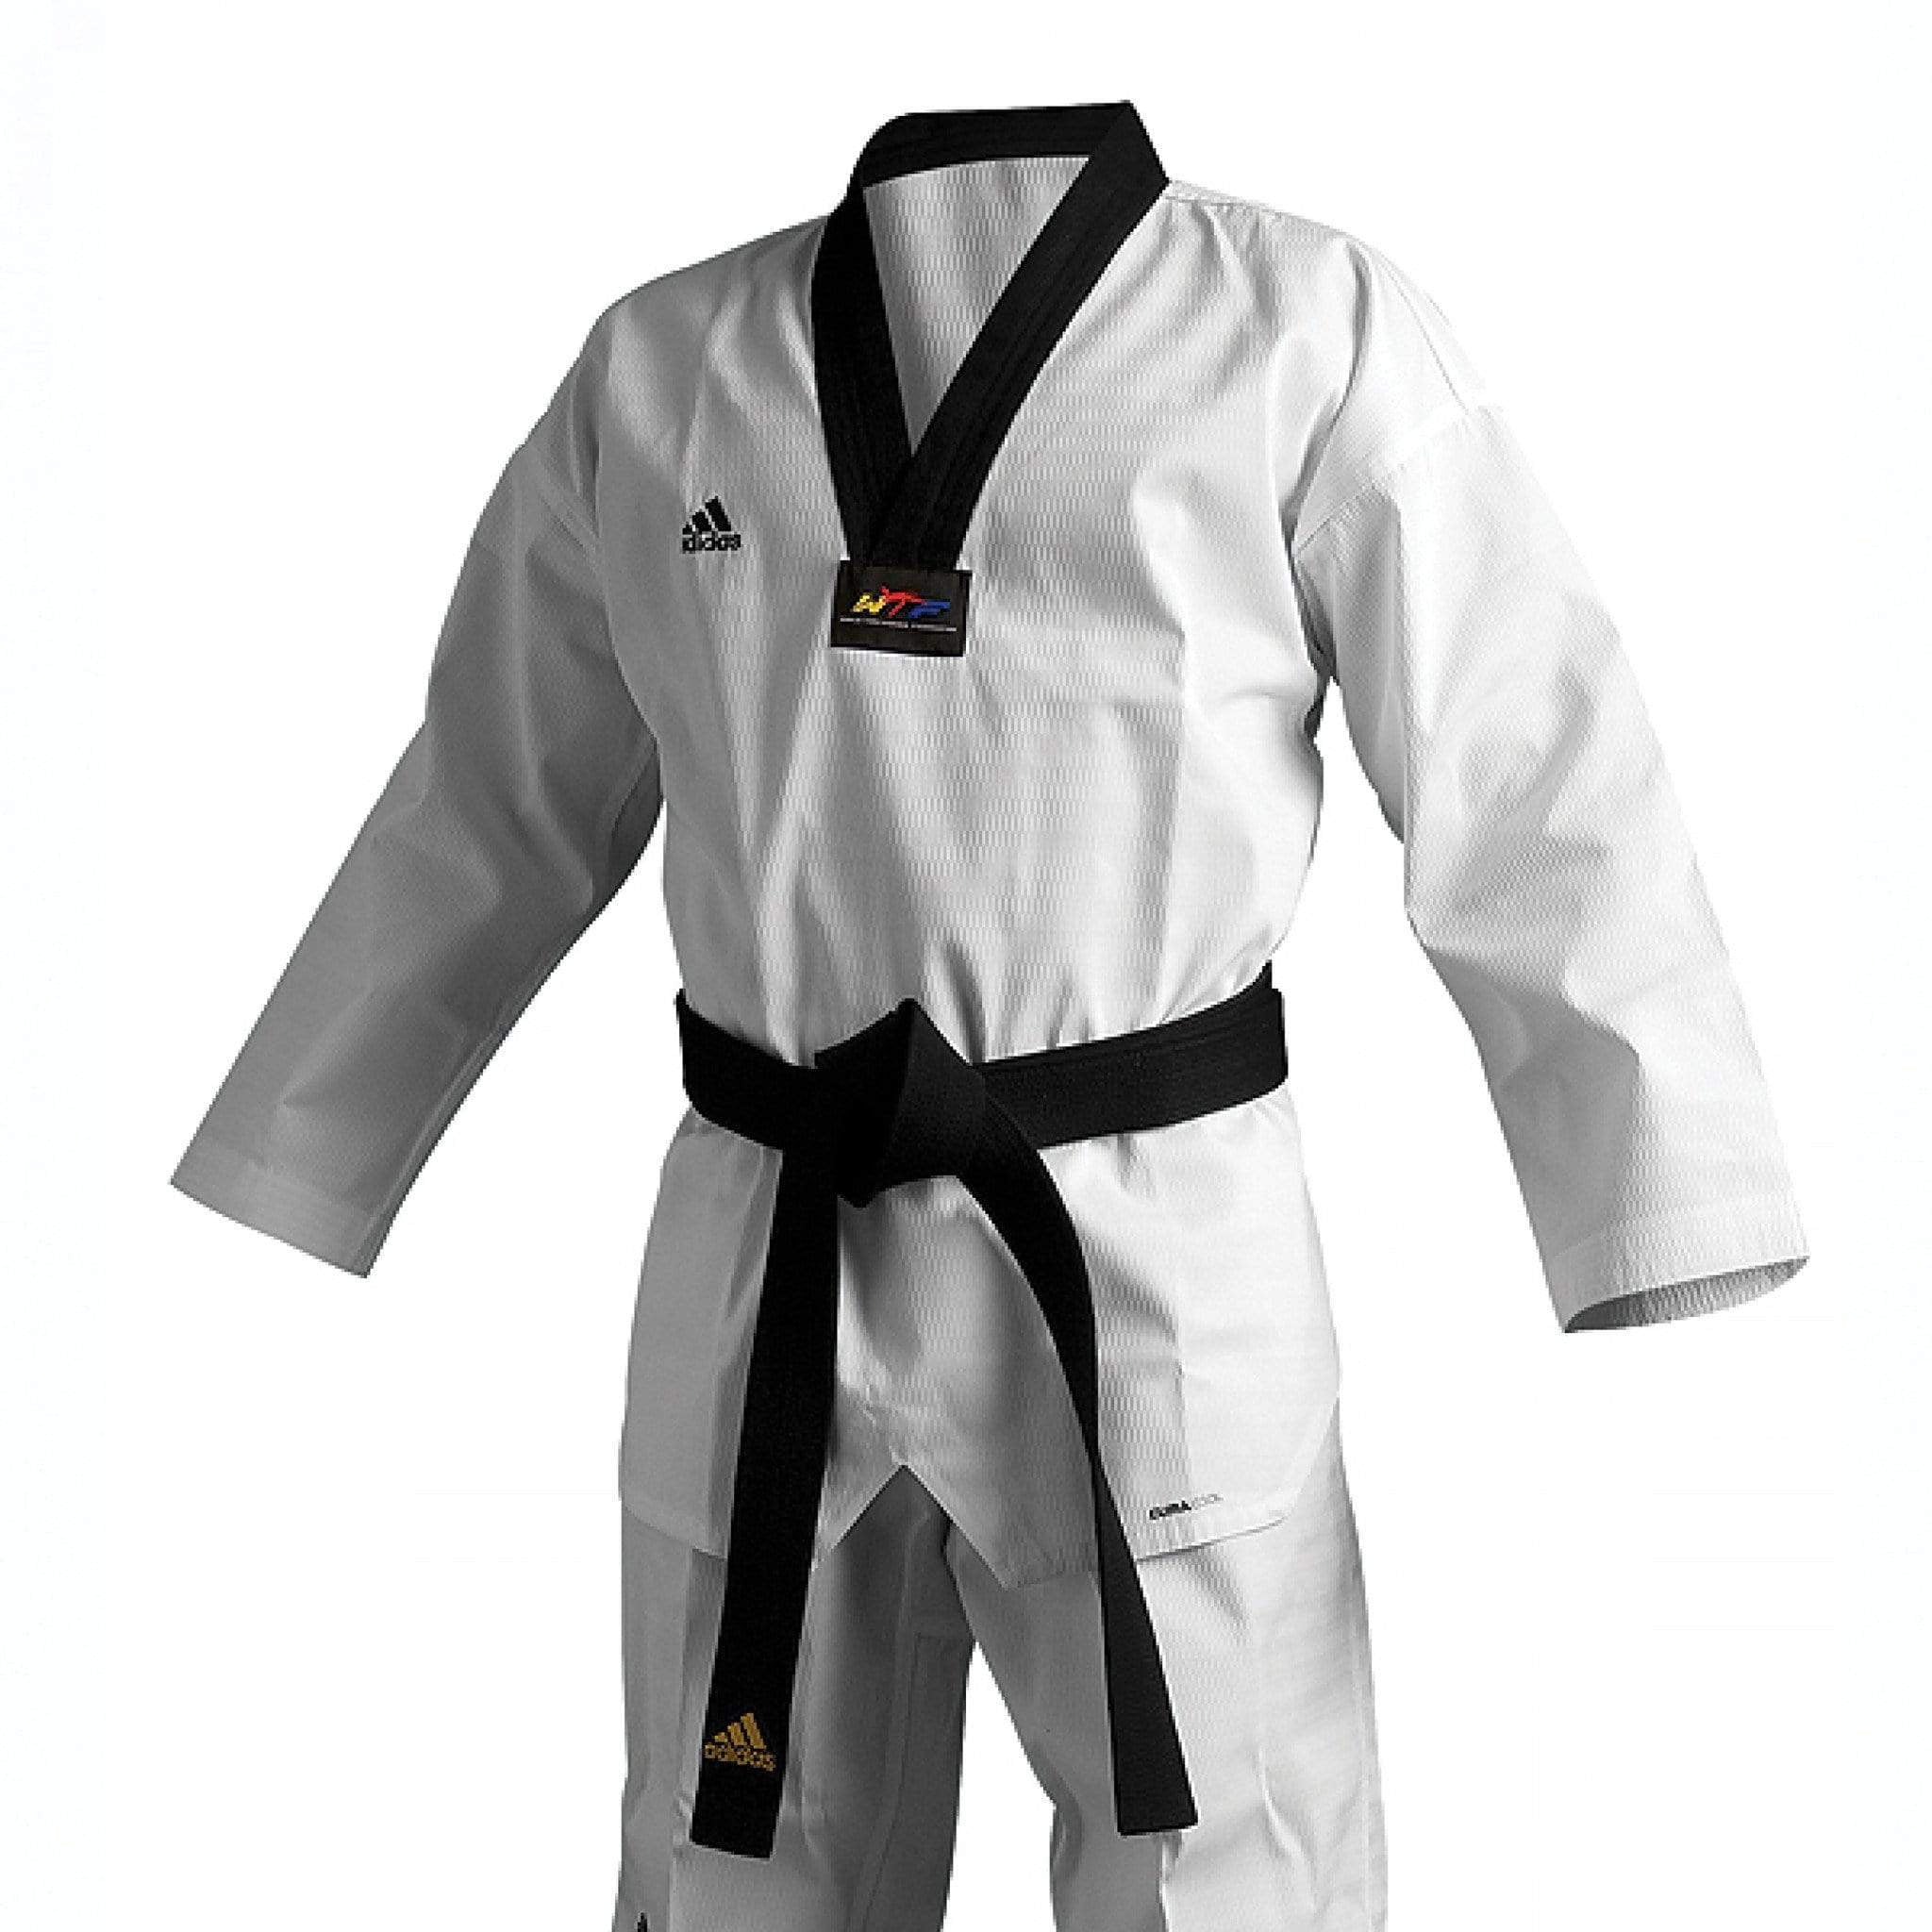 Details about  / Kids Men Taekwondo Shoes Martial Arts Trainers Karate Training Athletic all size